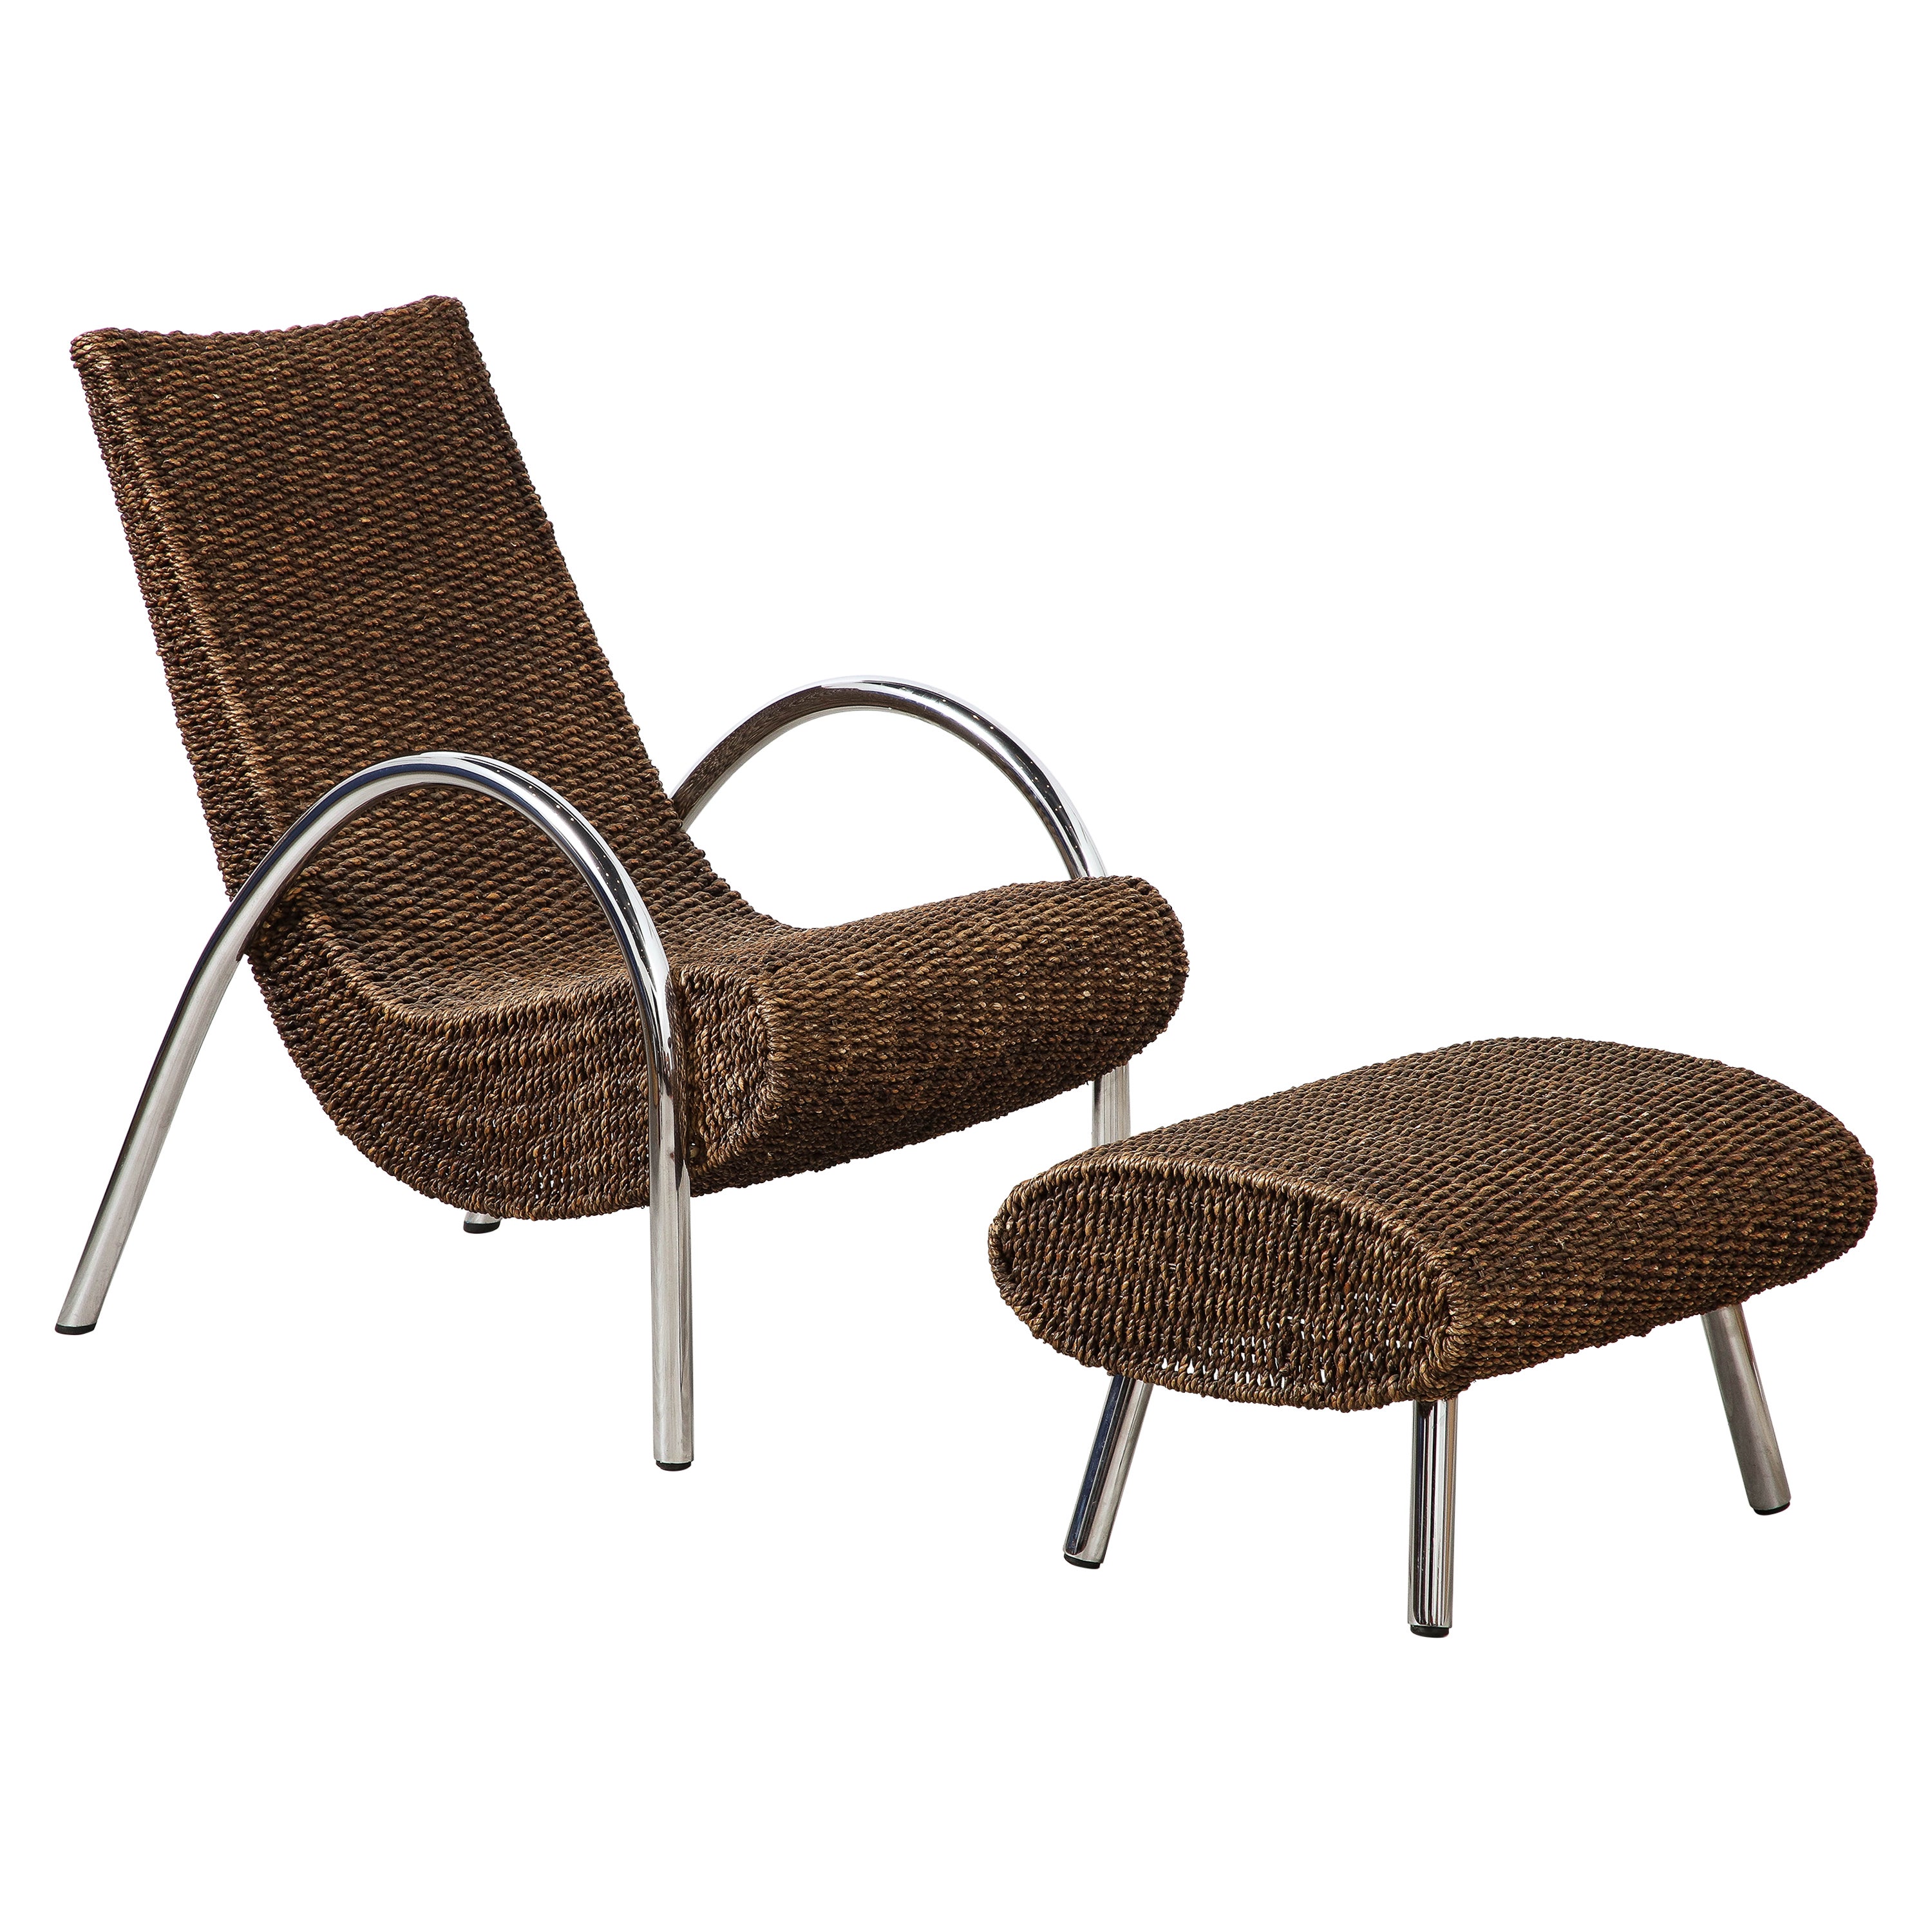 Spanish Bamboo and Chrome Lounge Chair with Ottoman, Spain, circa 1960 For Sale